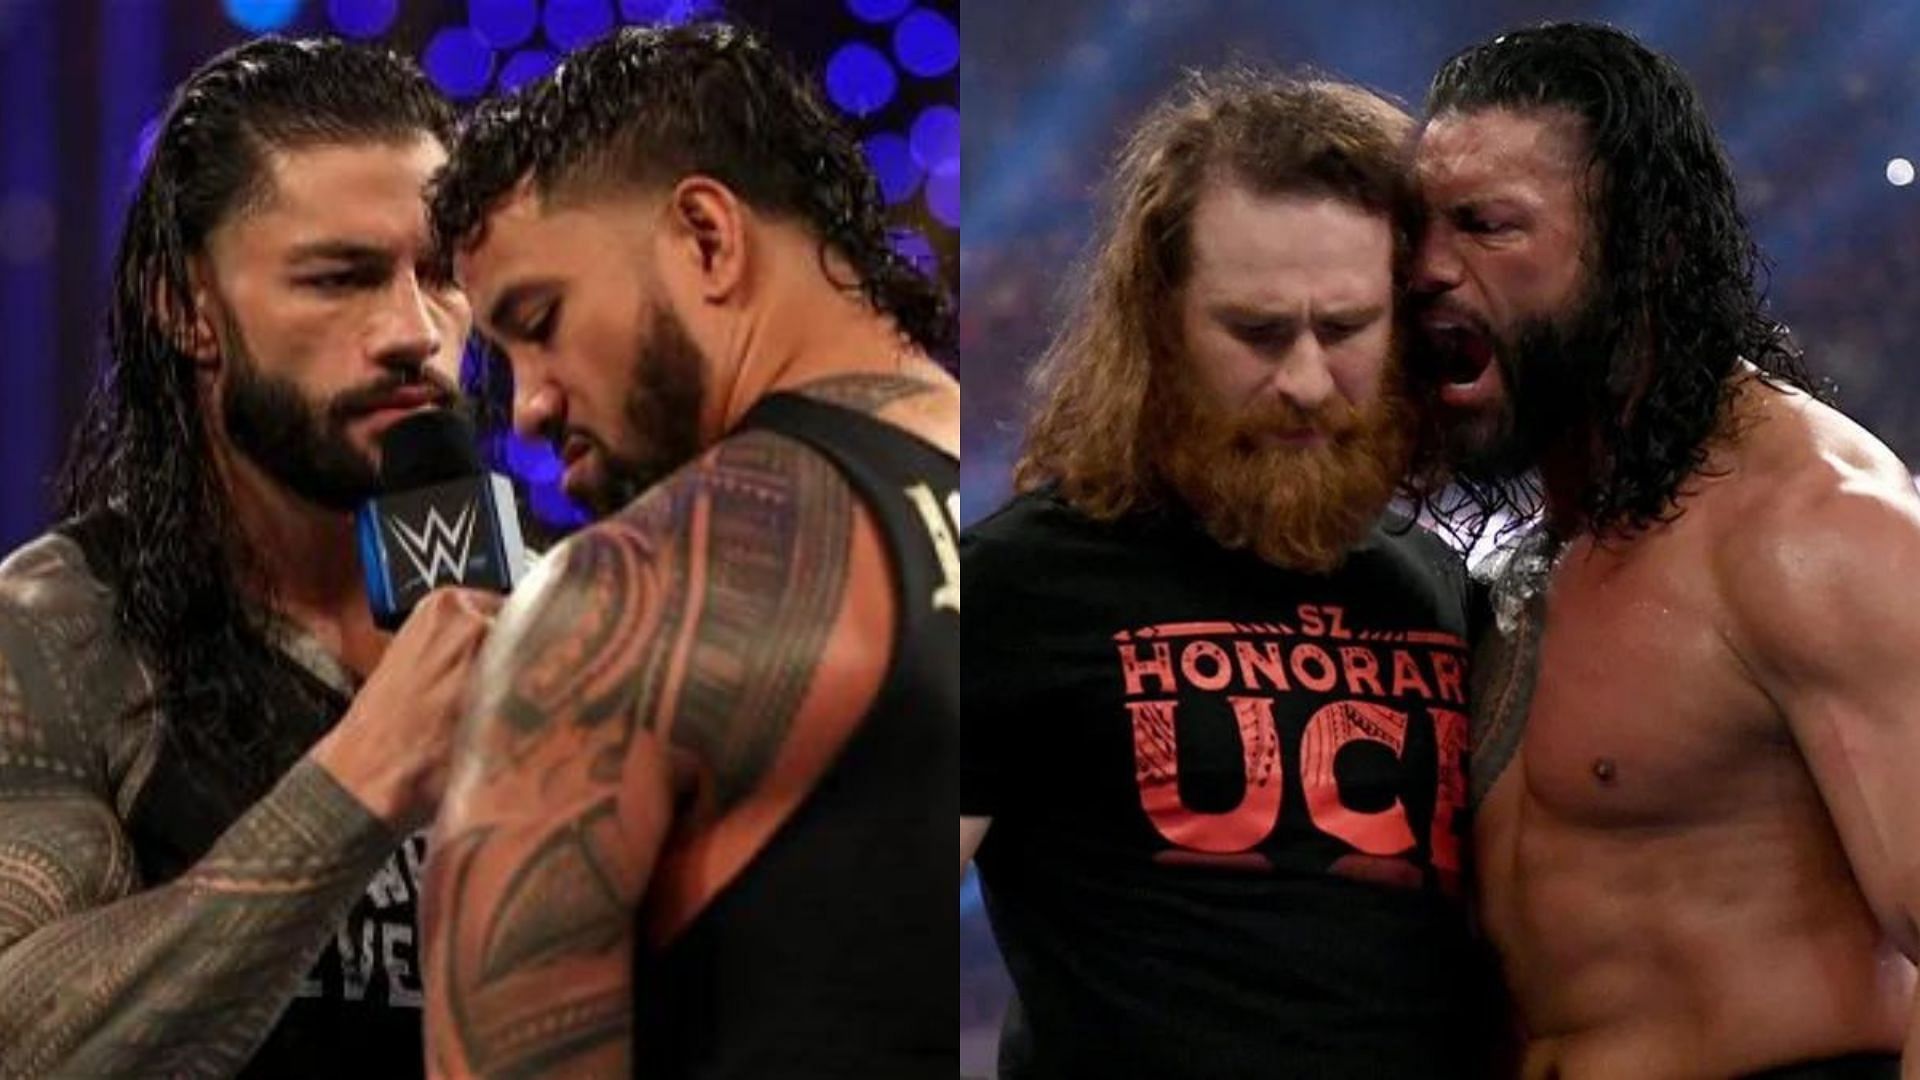 Could Roman Reigns cross paths with both Jey Uso and Sami Zayn in the near future?